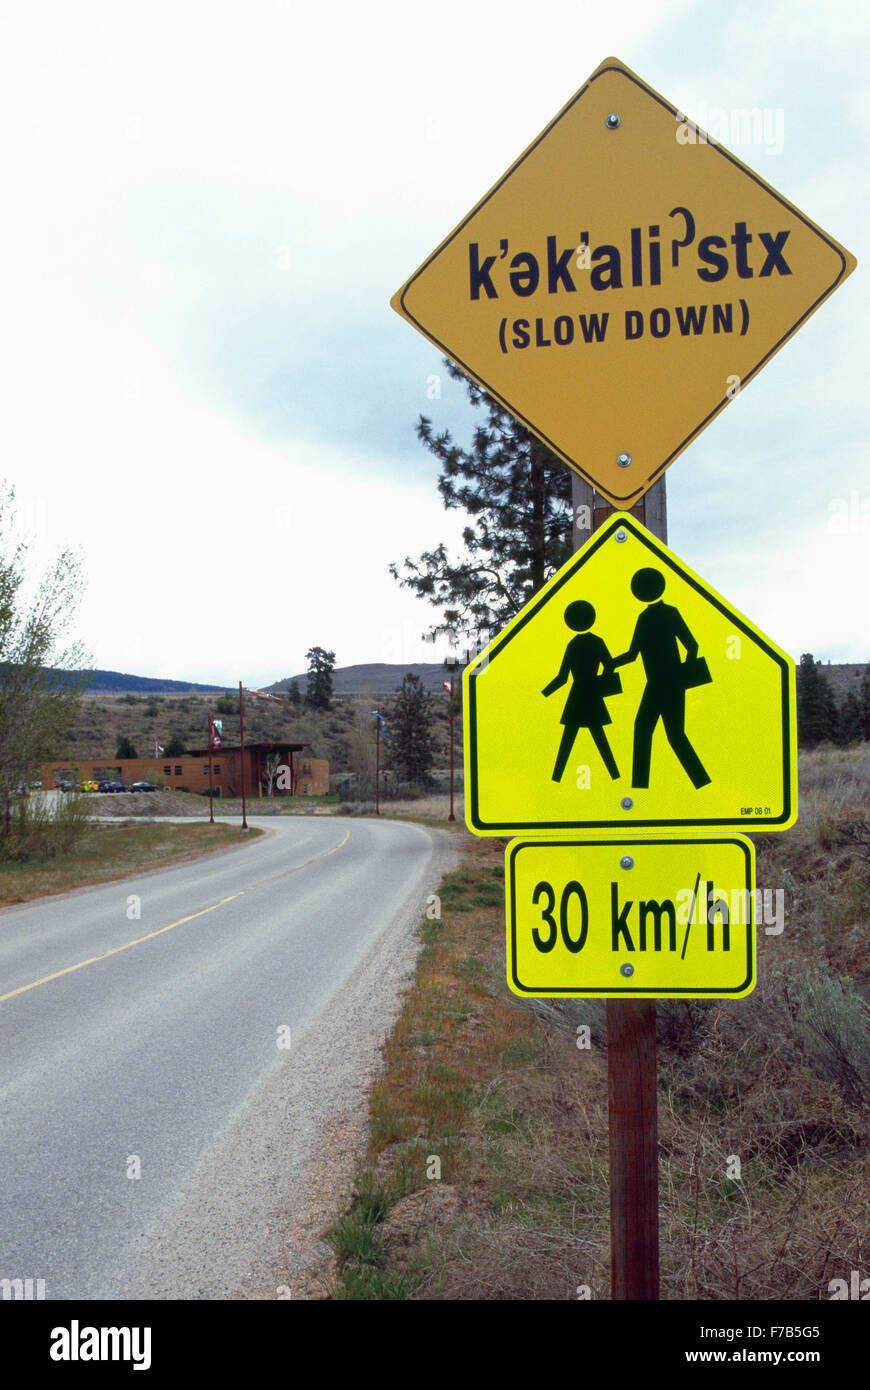 Bilingual Sign in Okanagan Indian and English Languages, Oliver, British Columbia, Canada - Slow Down, People / Children Walking Stock Photo